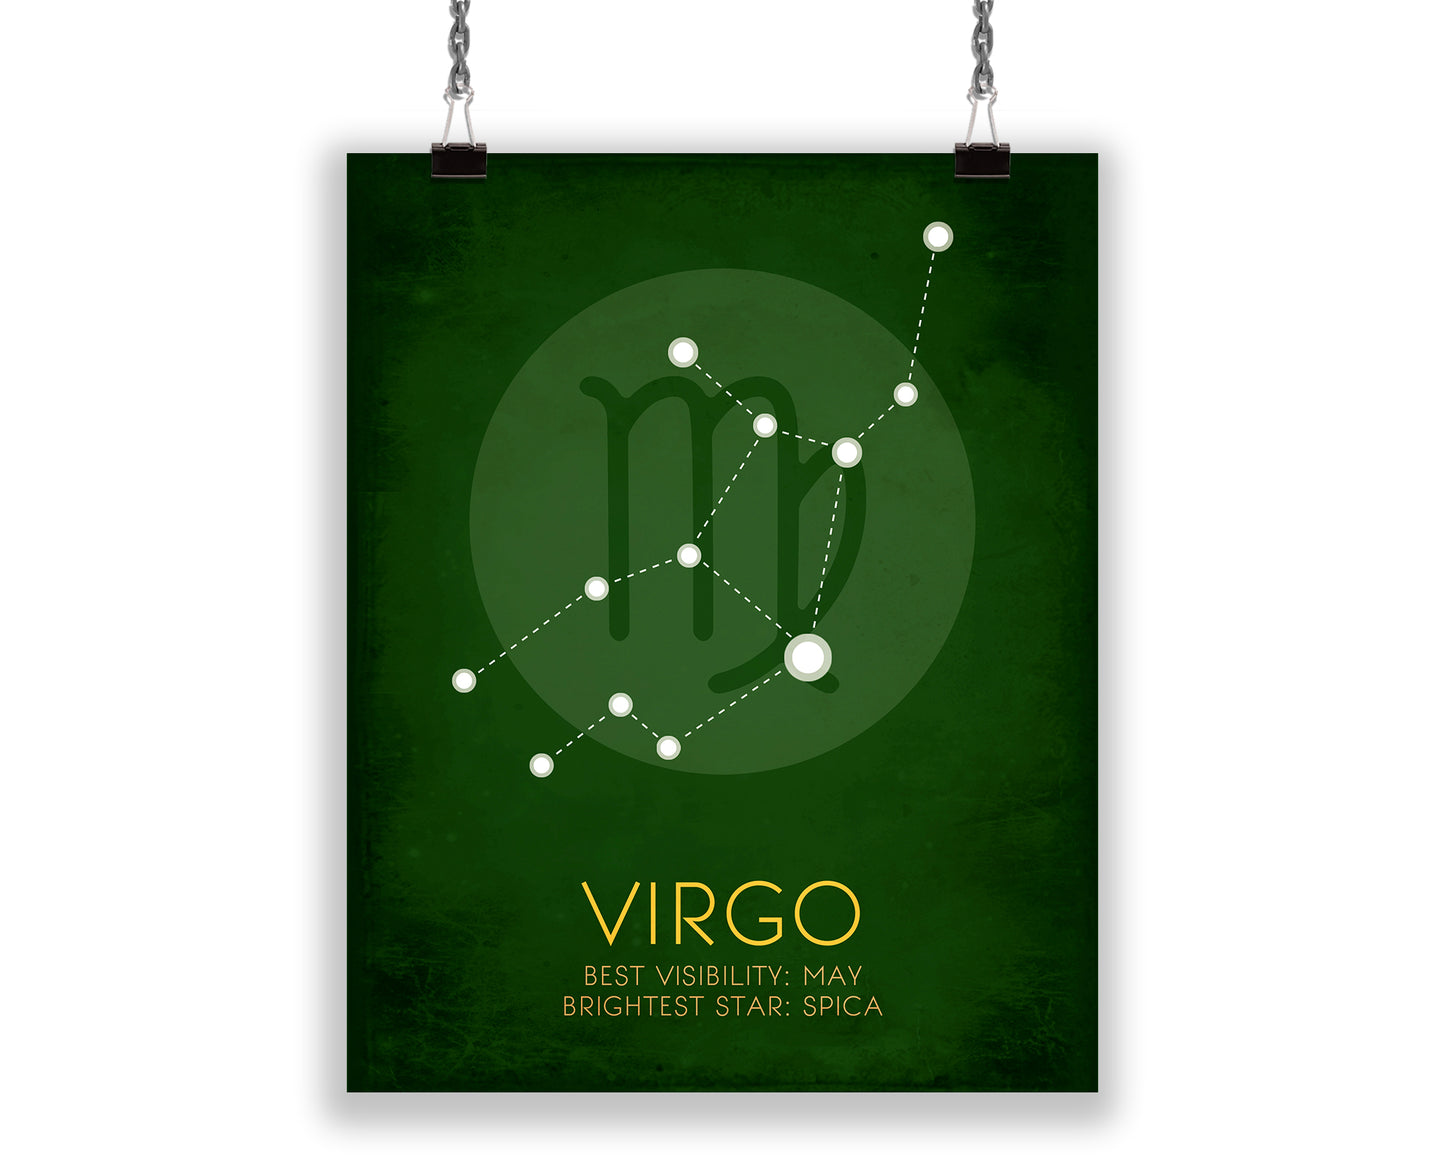 An emerald green art print showing the Virgo star constellation, the best month for optimal visibility, and the constellations brightest star. 